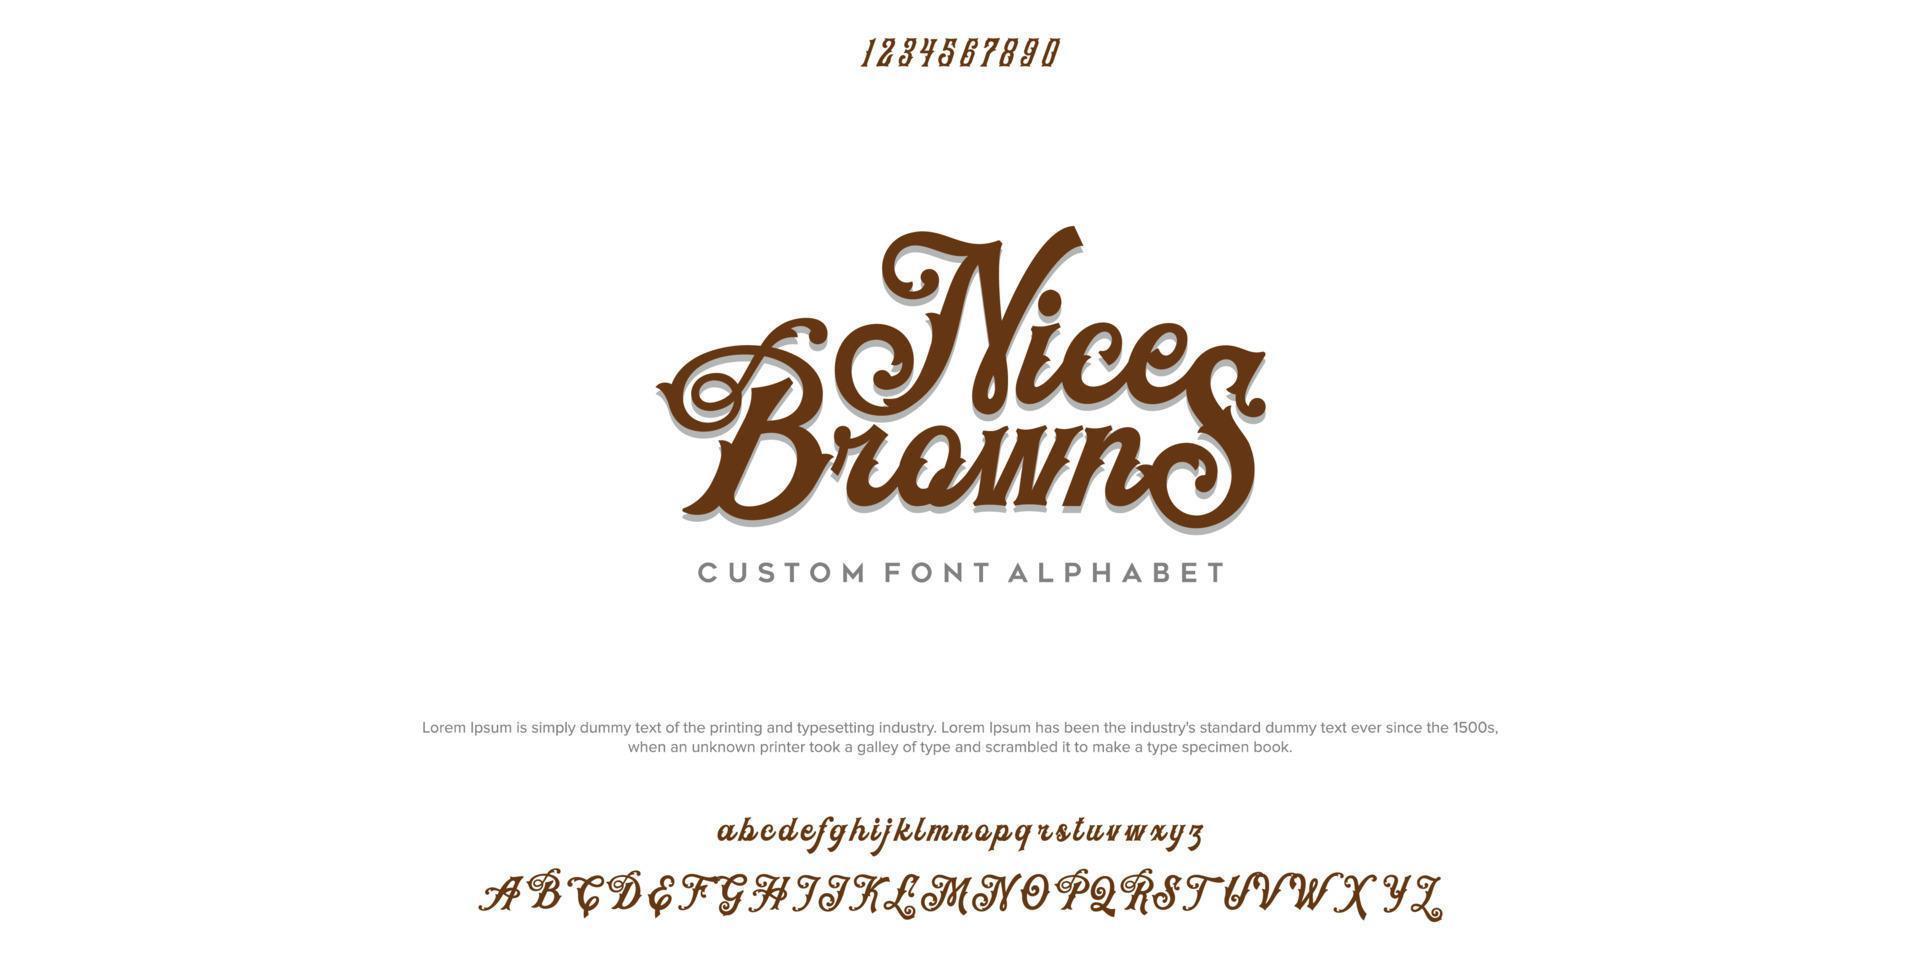 Nice Browns Elegant font letter alphabet set. Classic brown lettering Typographic Font. upper and lowercase with numbers. vector illustration